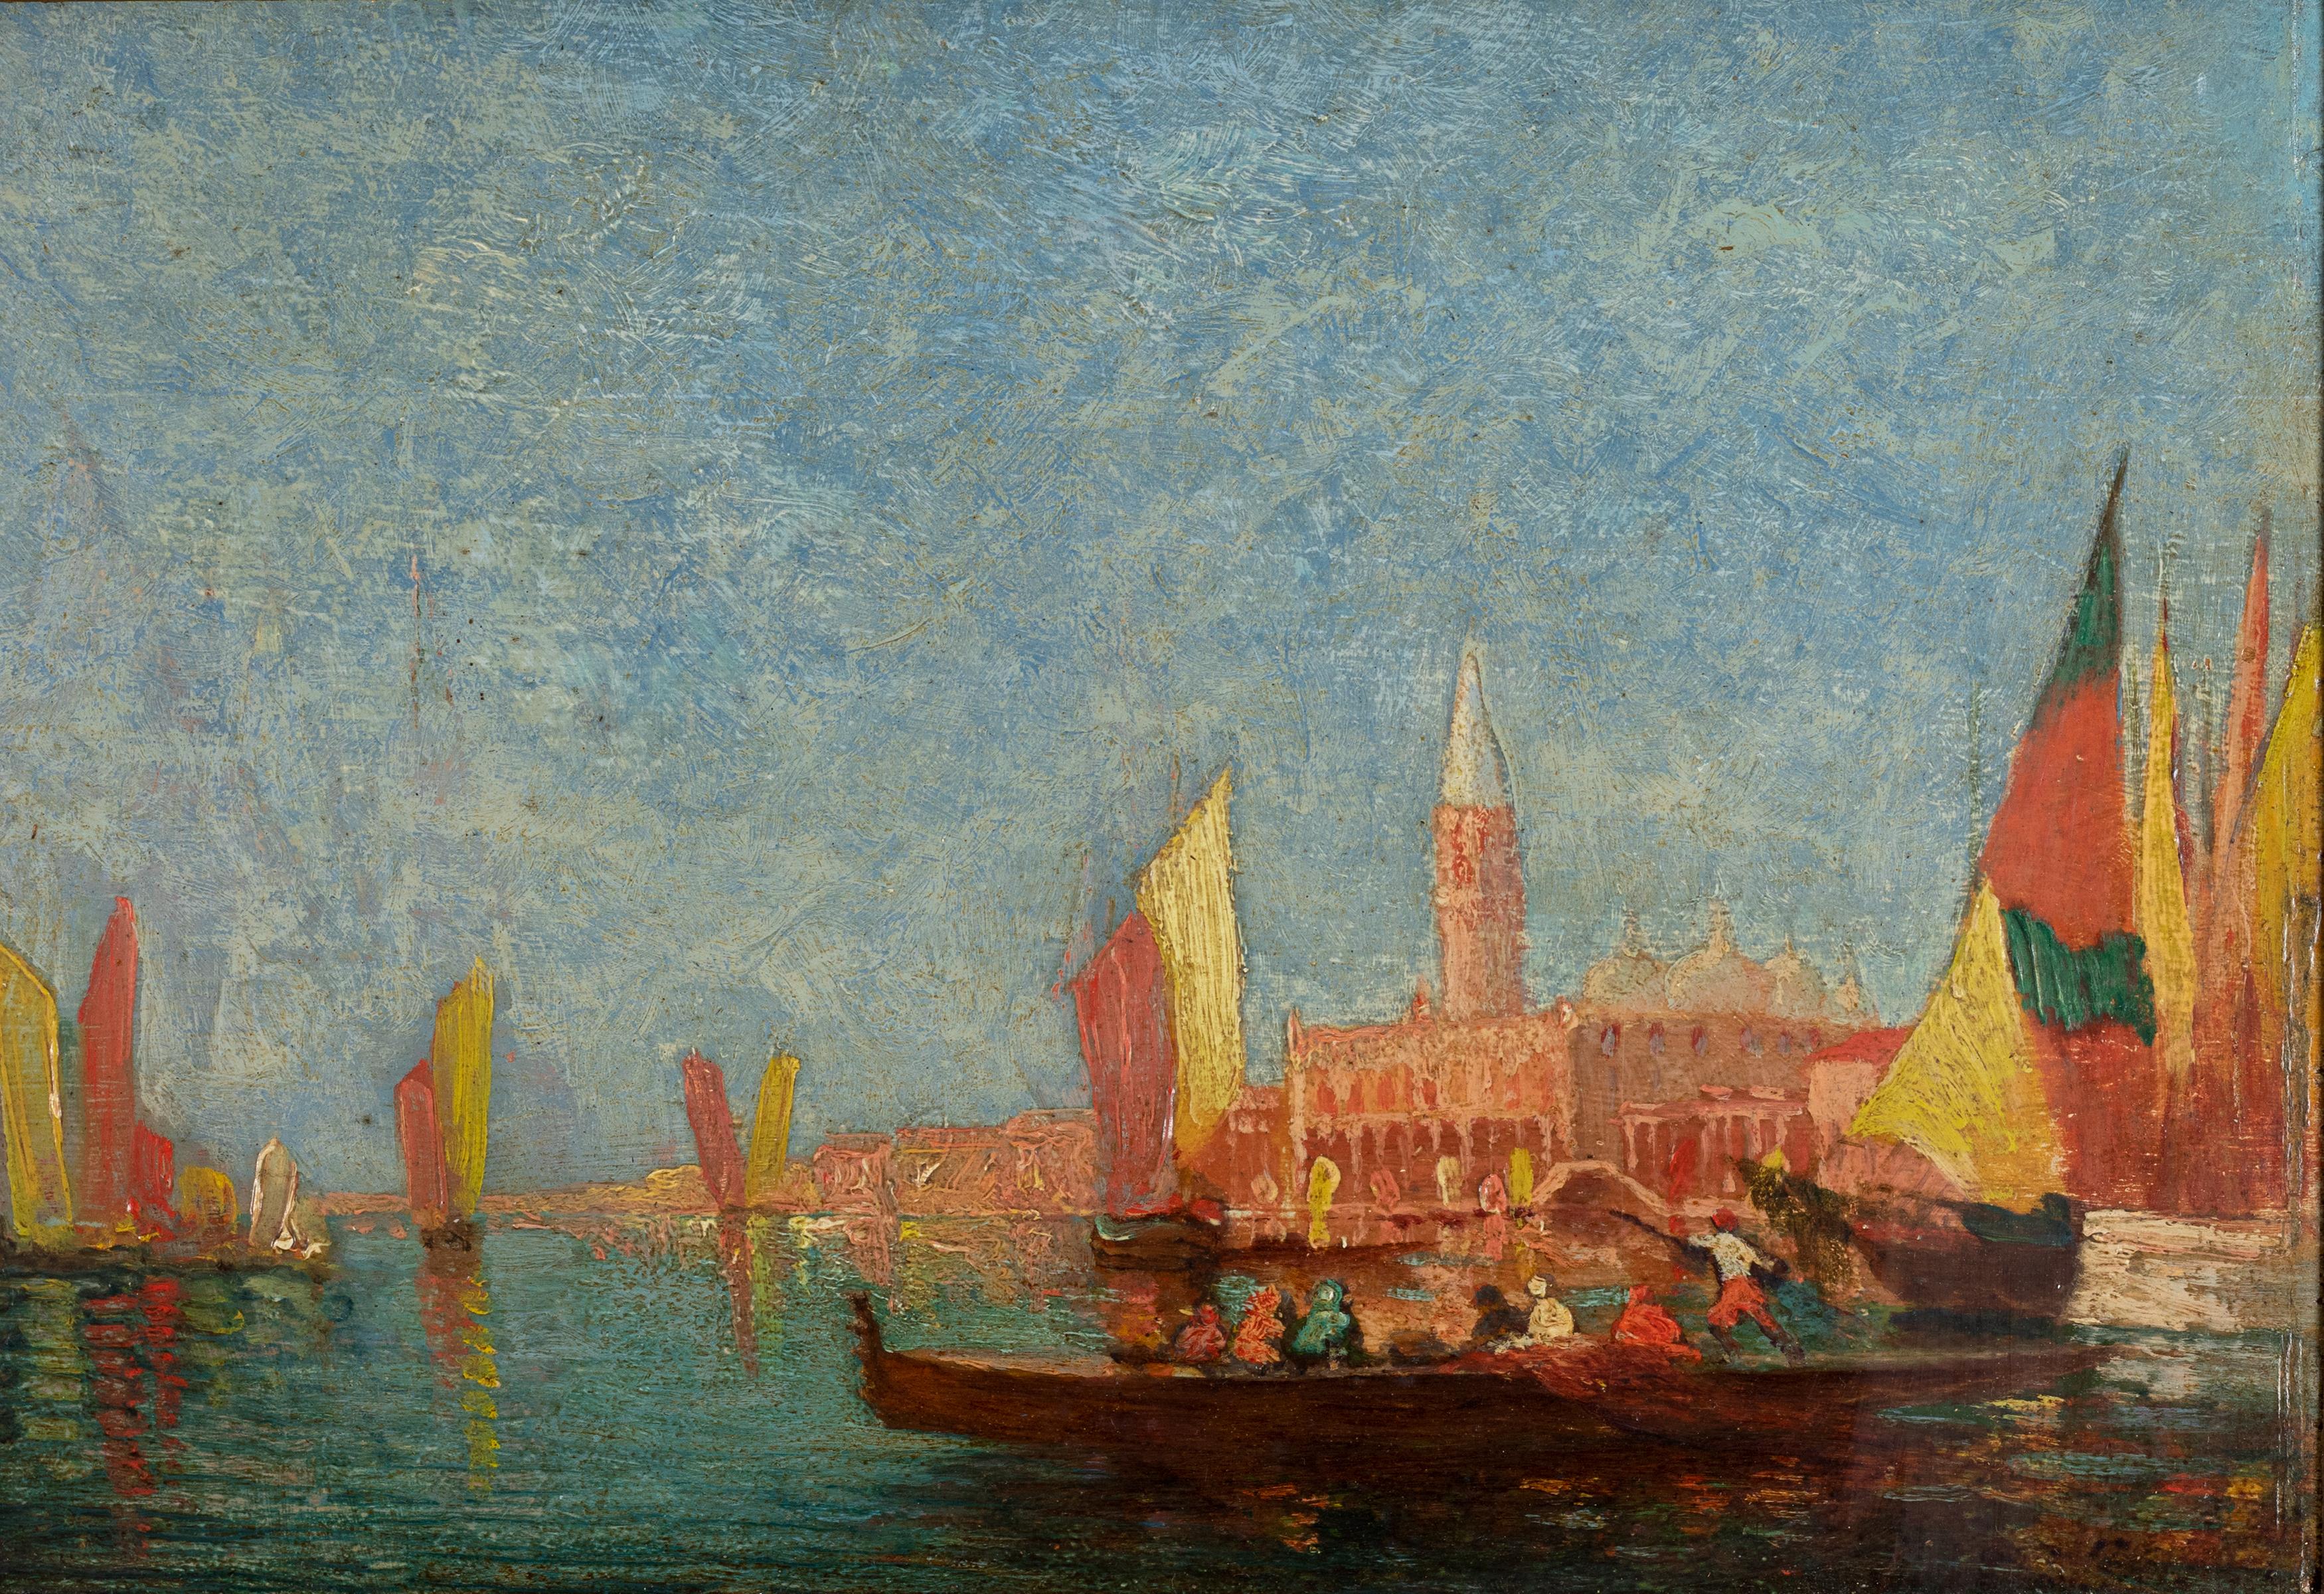 A 19th century colorful landscape of Venice and the channel with boats.
Oil on papercoard.
Frame:
  Width: 20,47 in (52 cm) 
  Depth: 16,14 in (41 cm) 
Canvas:
  Width:  13,77 in (35 cm) 
  Depth: 9,44 in (24 cm)